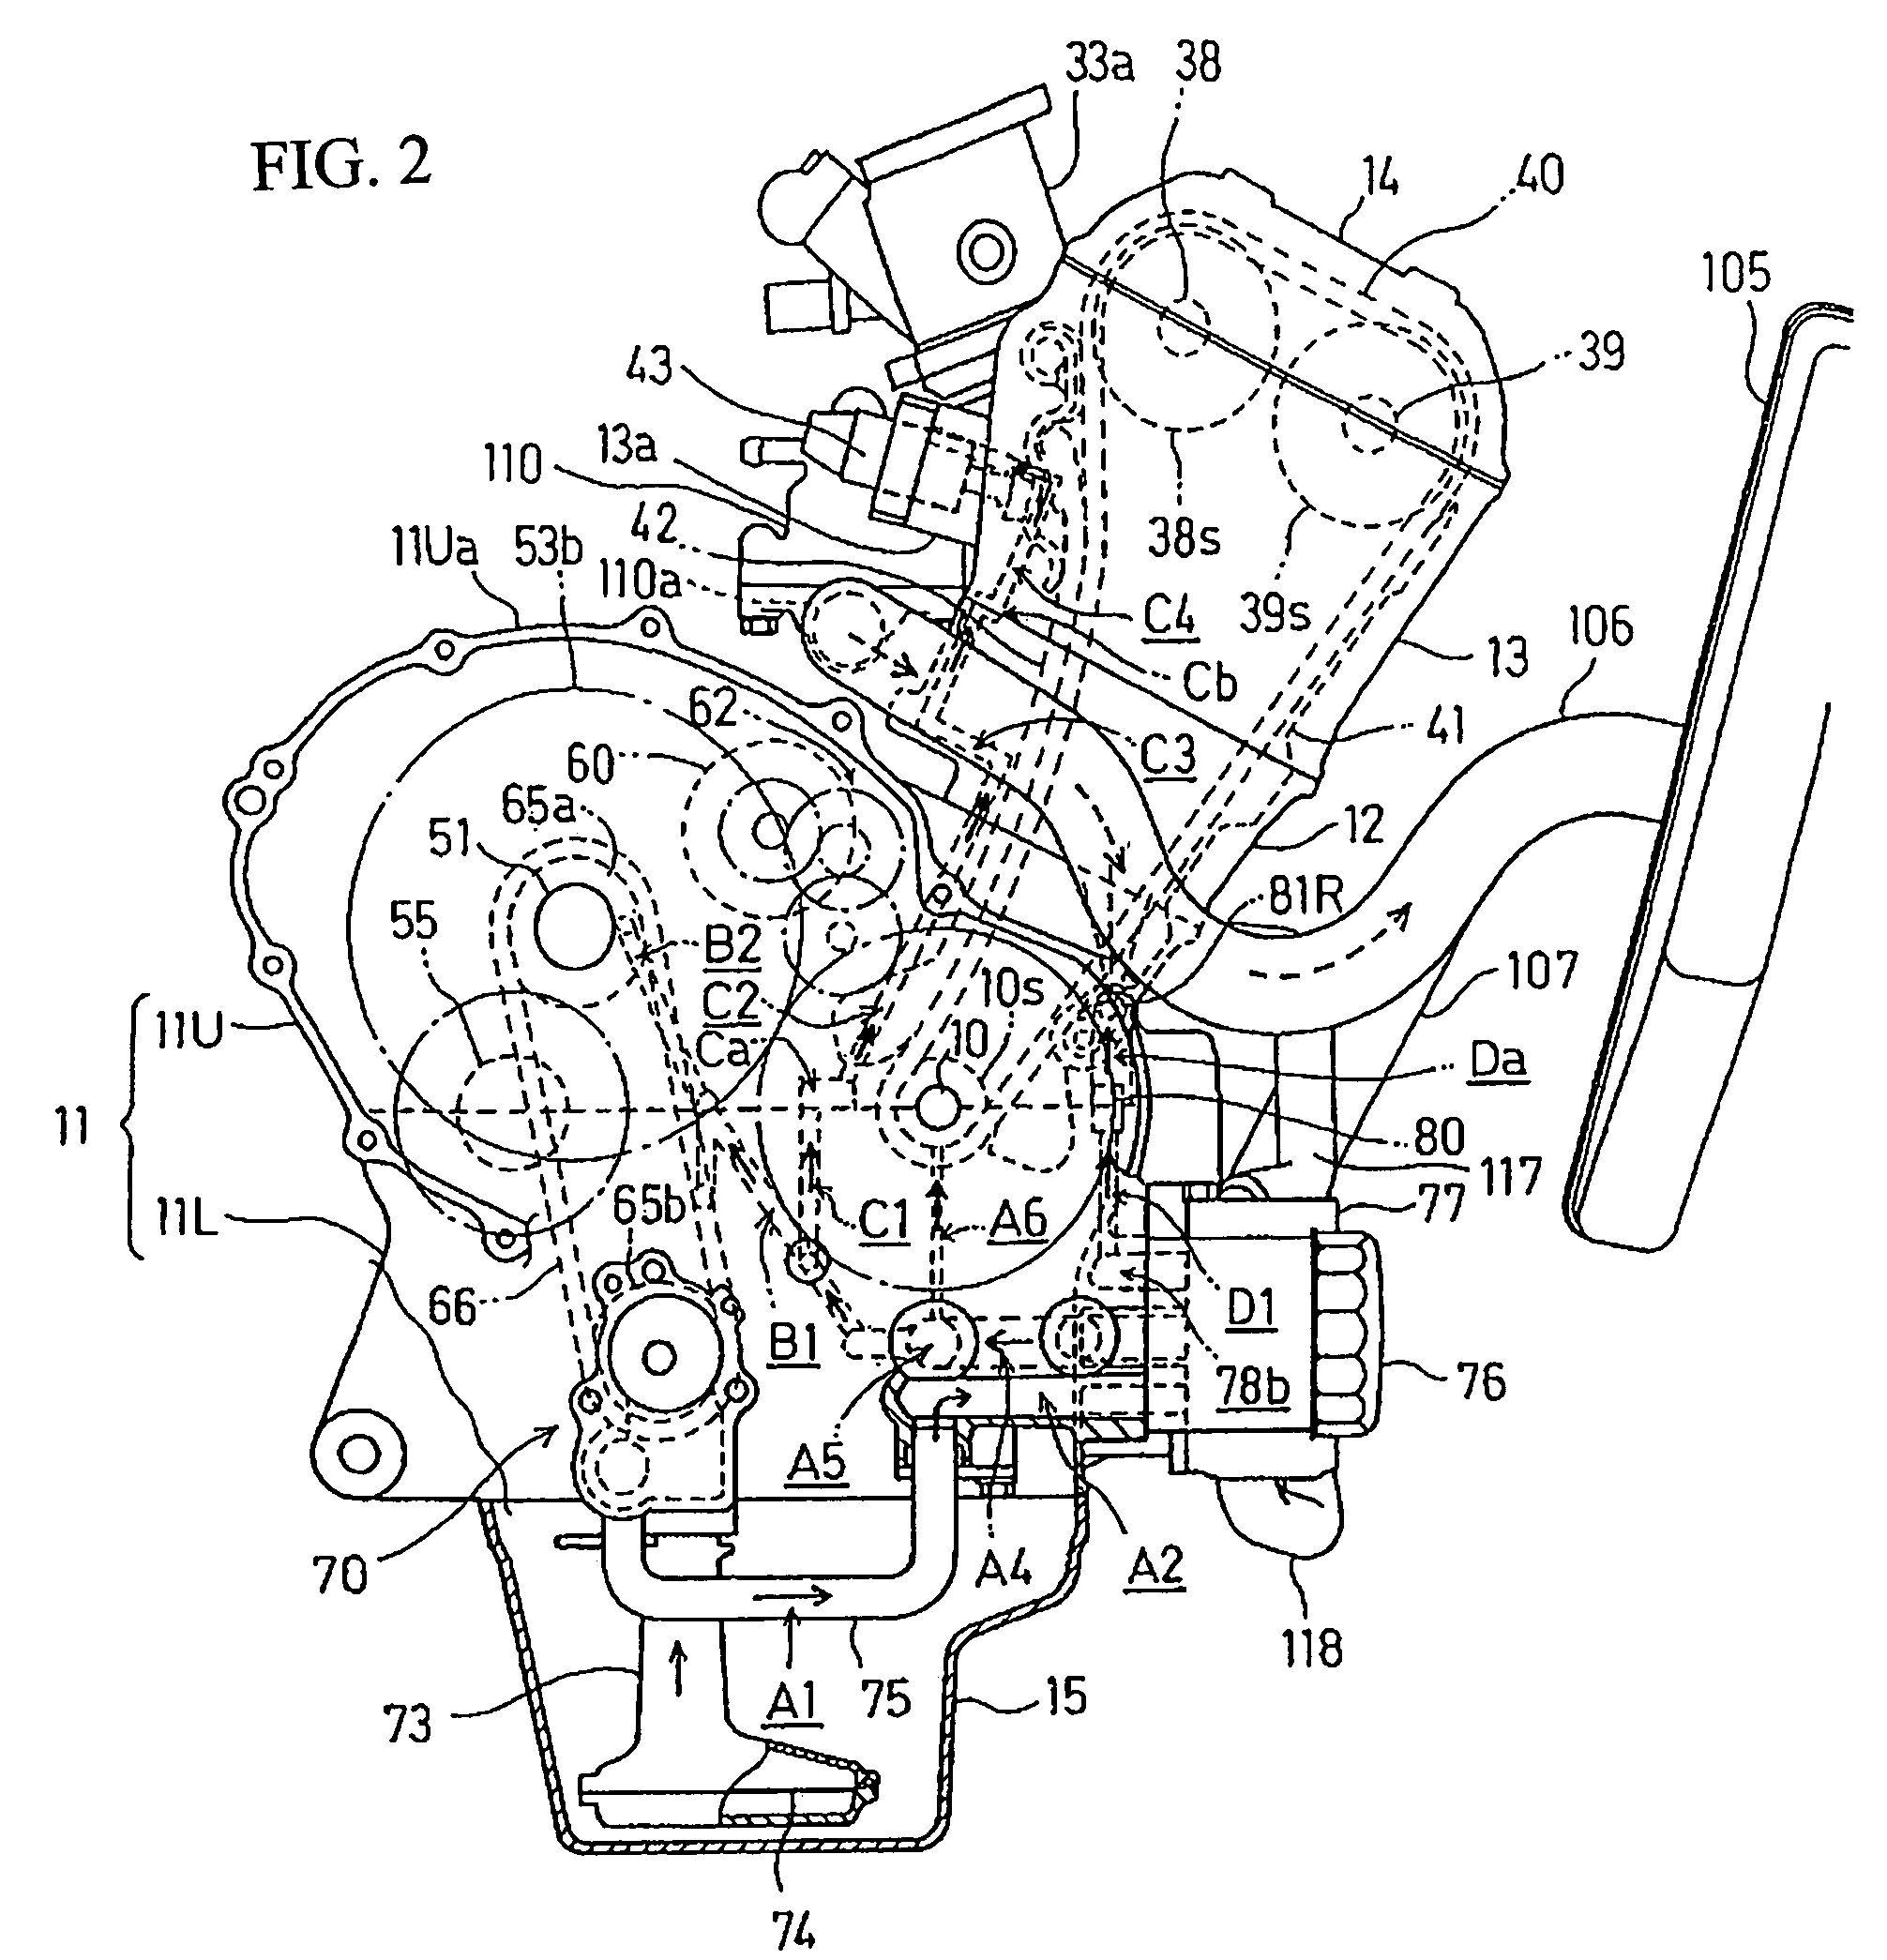 Cooling oil delivery structure for a vehicular generator, and engine including same